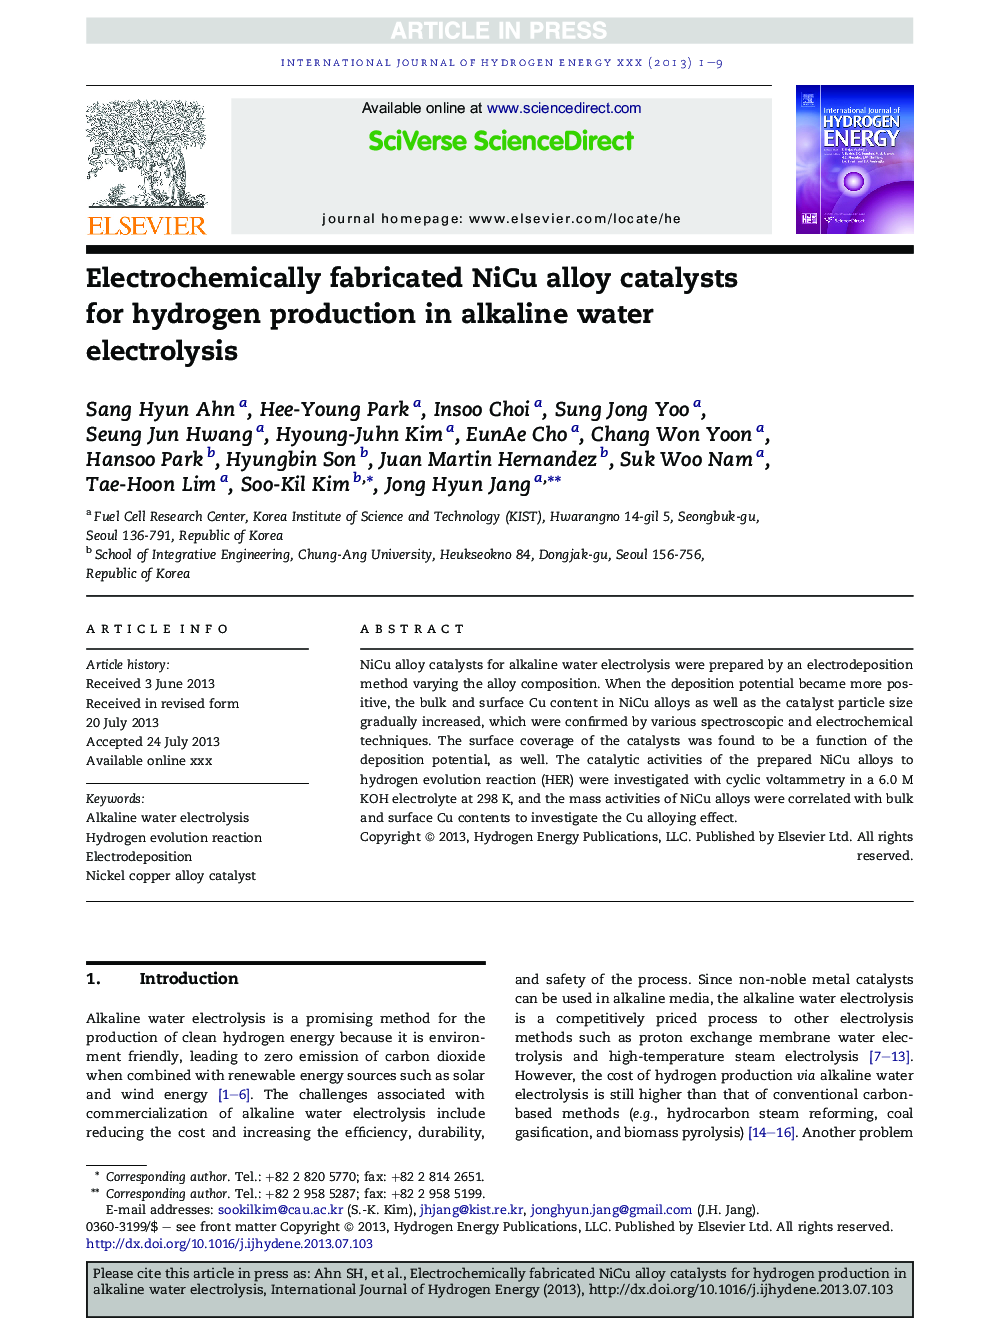 Electrochemically fabricated NiCu alloy catalysts for hydrogen production in alkaline water electrolysis